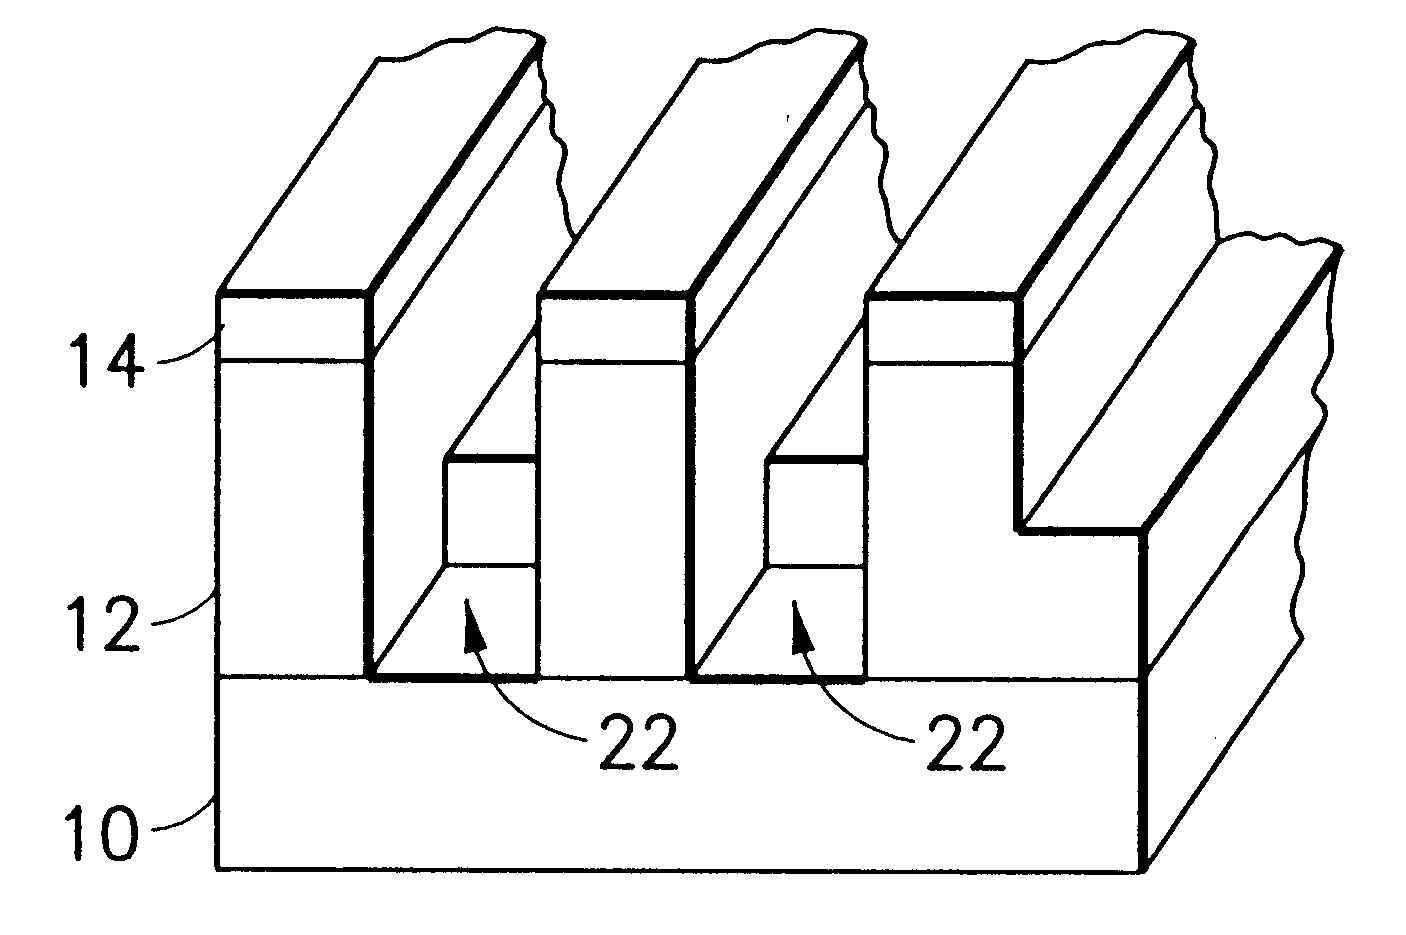 Process for self-alignment of sub-critical contacts to wiring